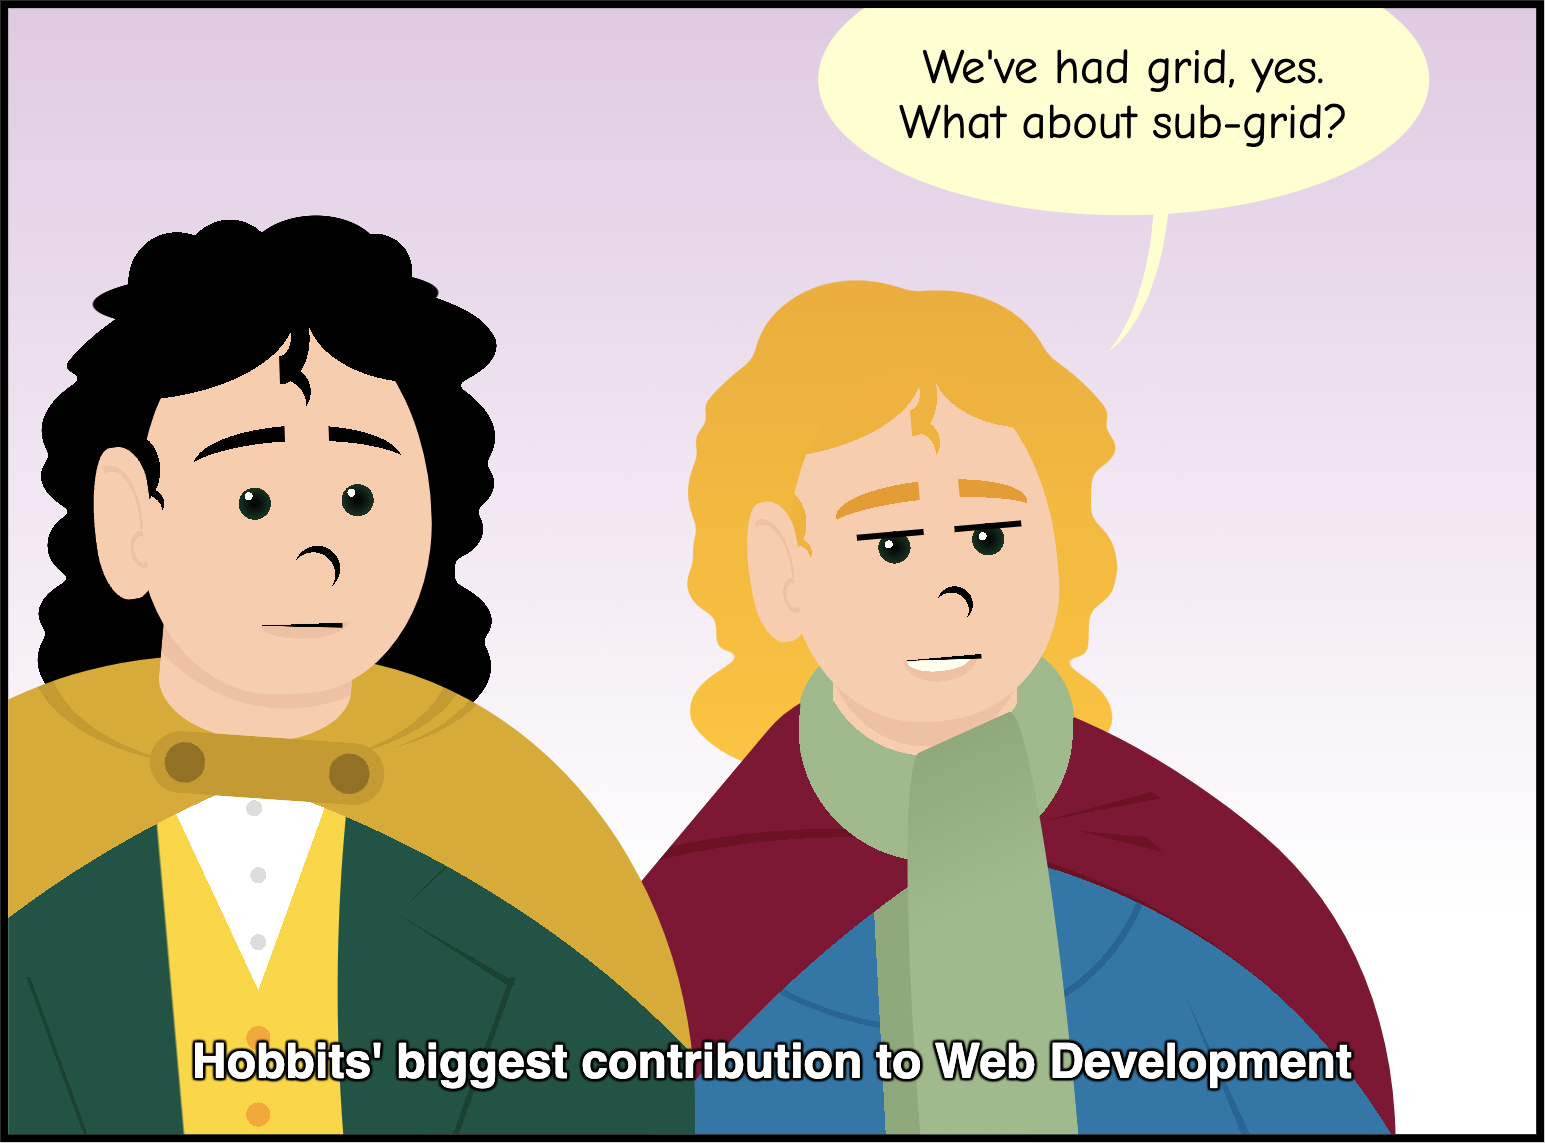 Cartoon titled 'Hobbits biggest contribution to Web Development. It shows two hobbits, and one says 'We have had grid, yes. What about sub-grid?'